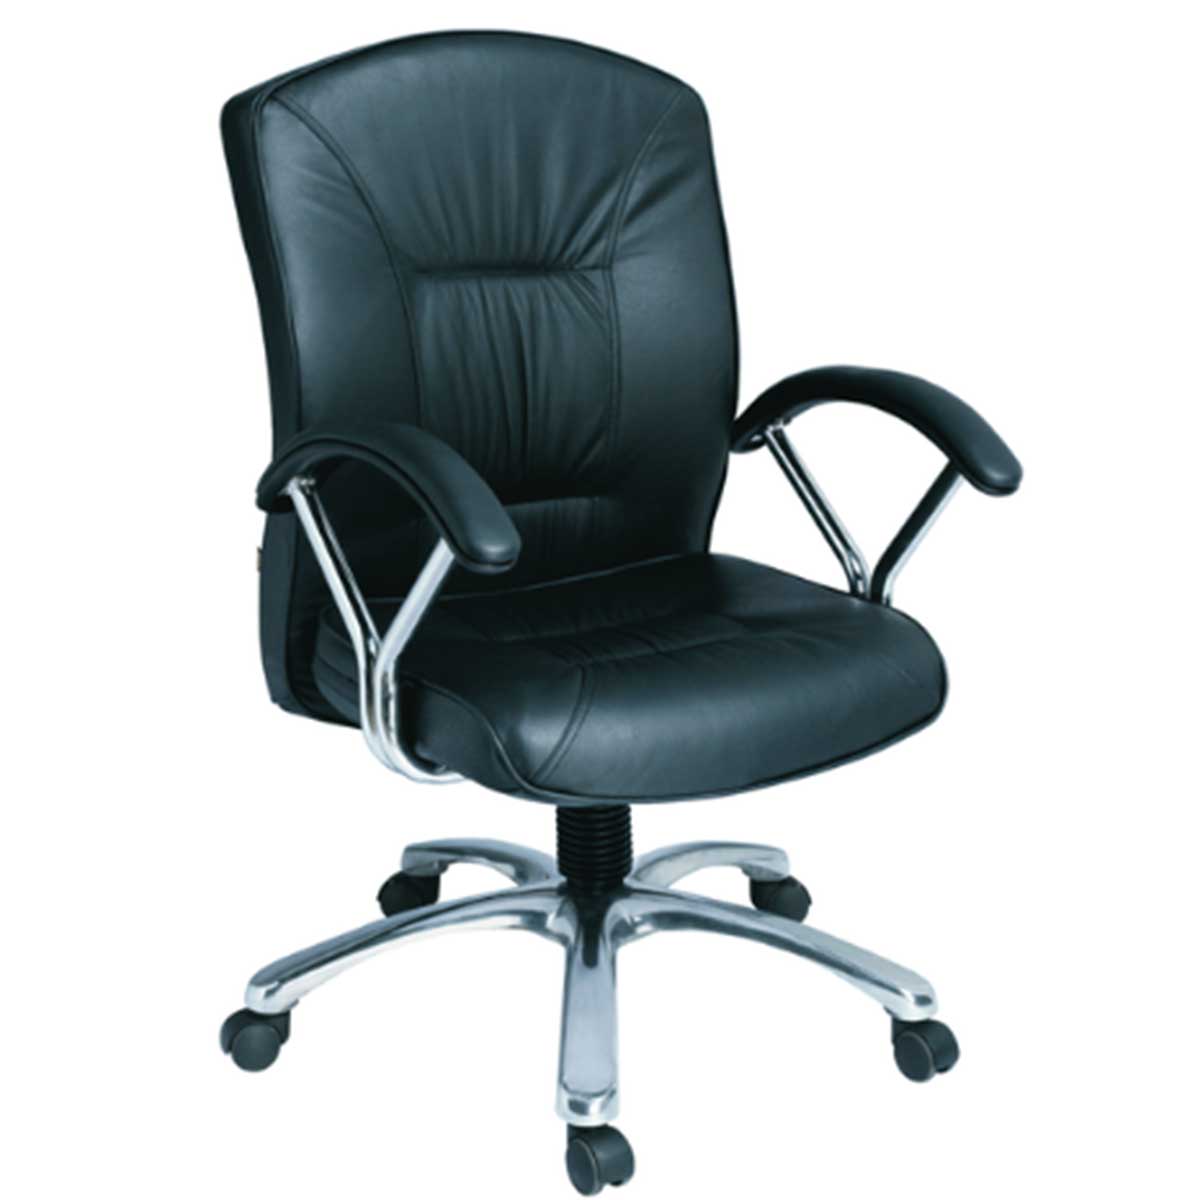 Godrej office chair Manufacturers, Suppliers in Delhi Cantonment